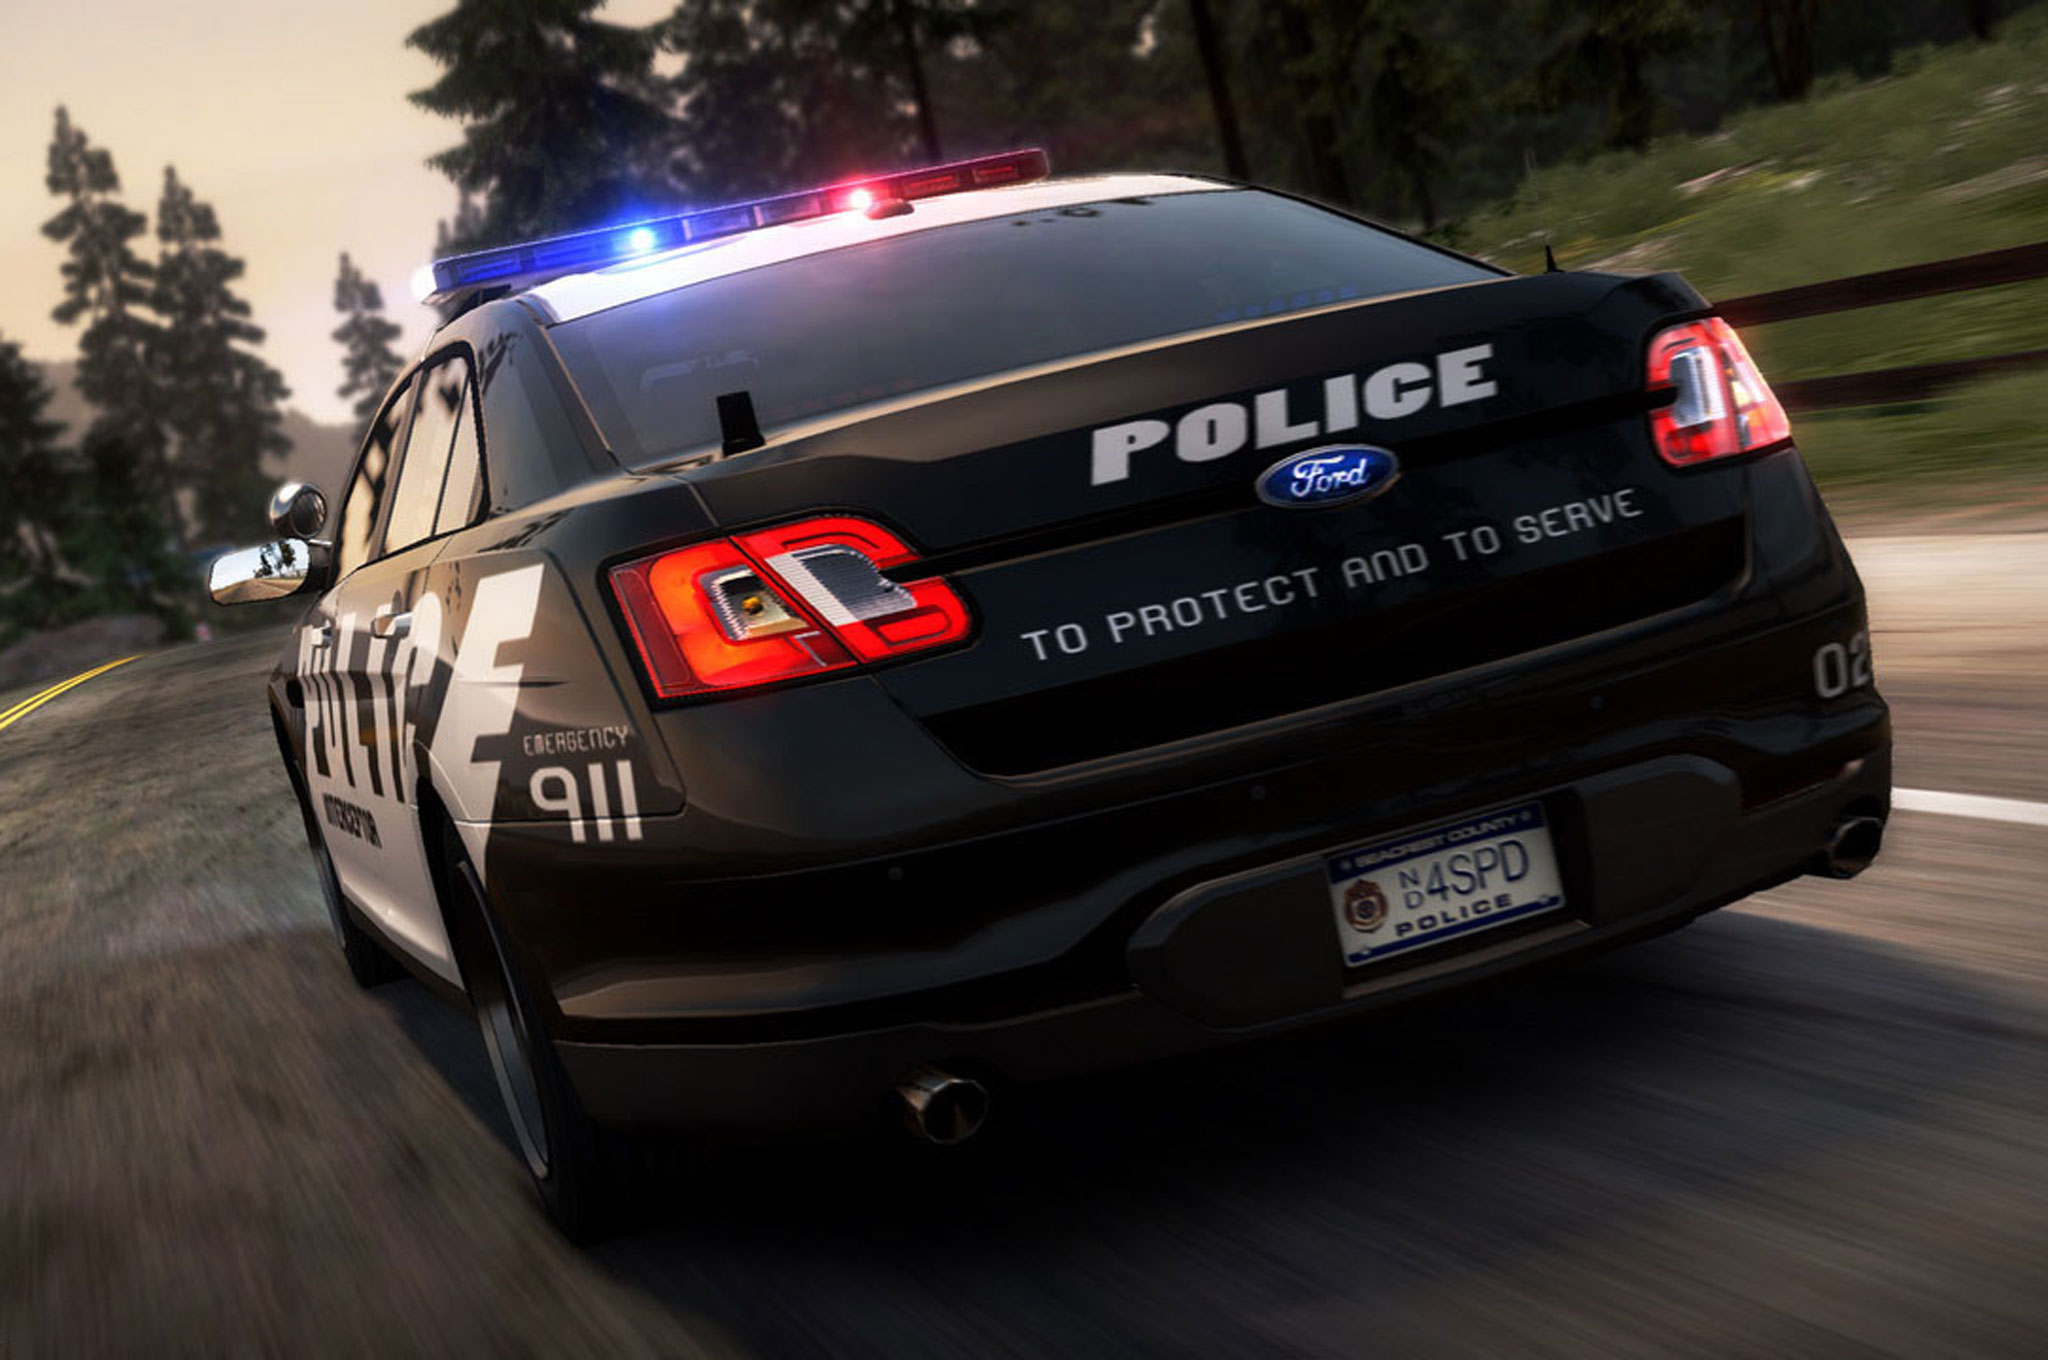 Ford Interceptor Backgrounds, Compatible - PC, Mobile, Gadgets| 2048x1360 px